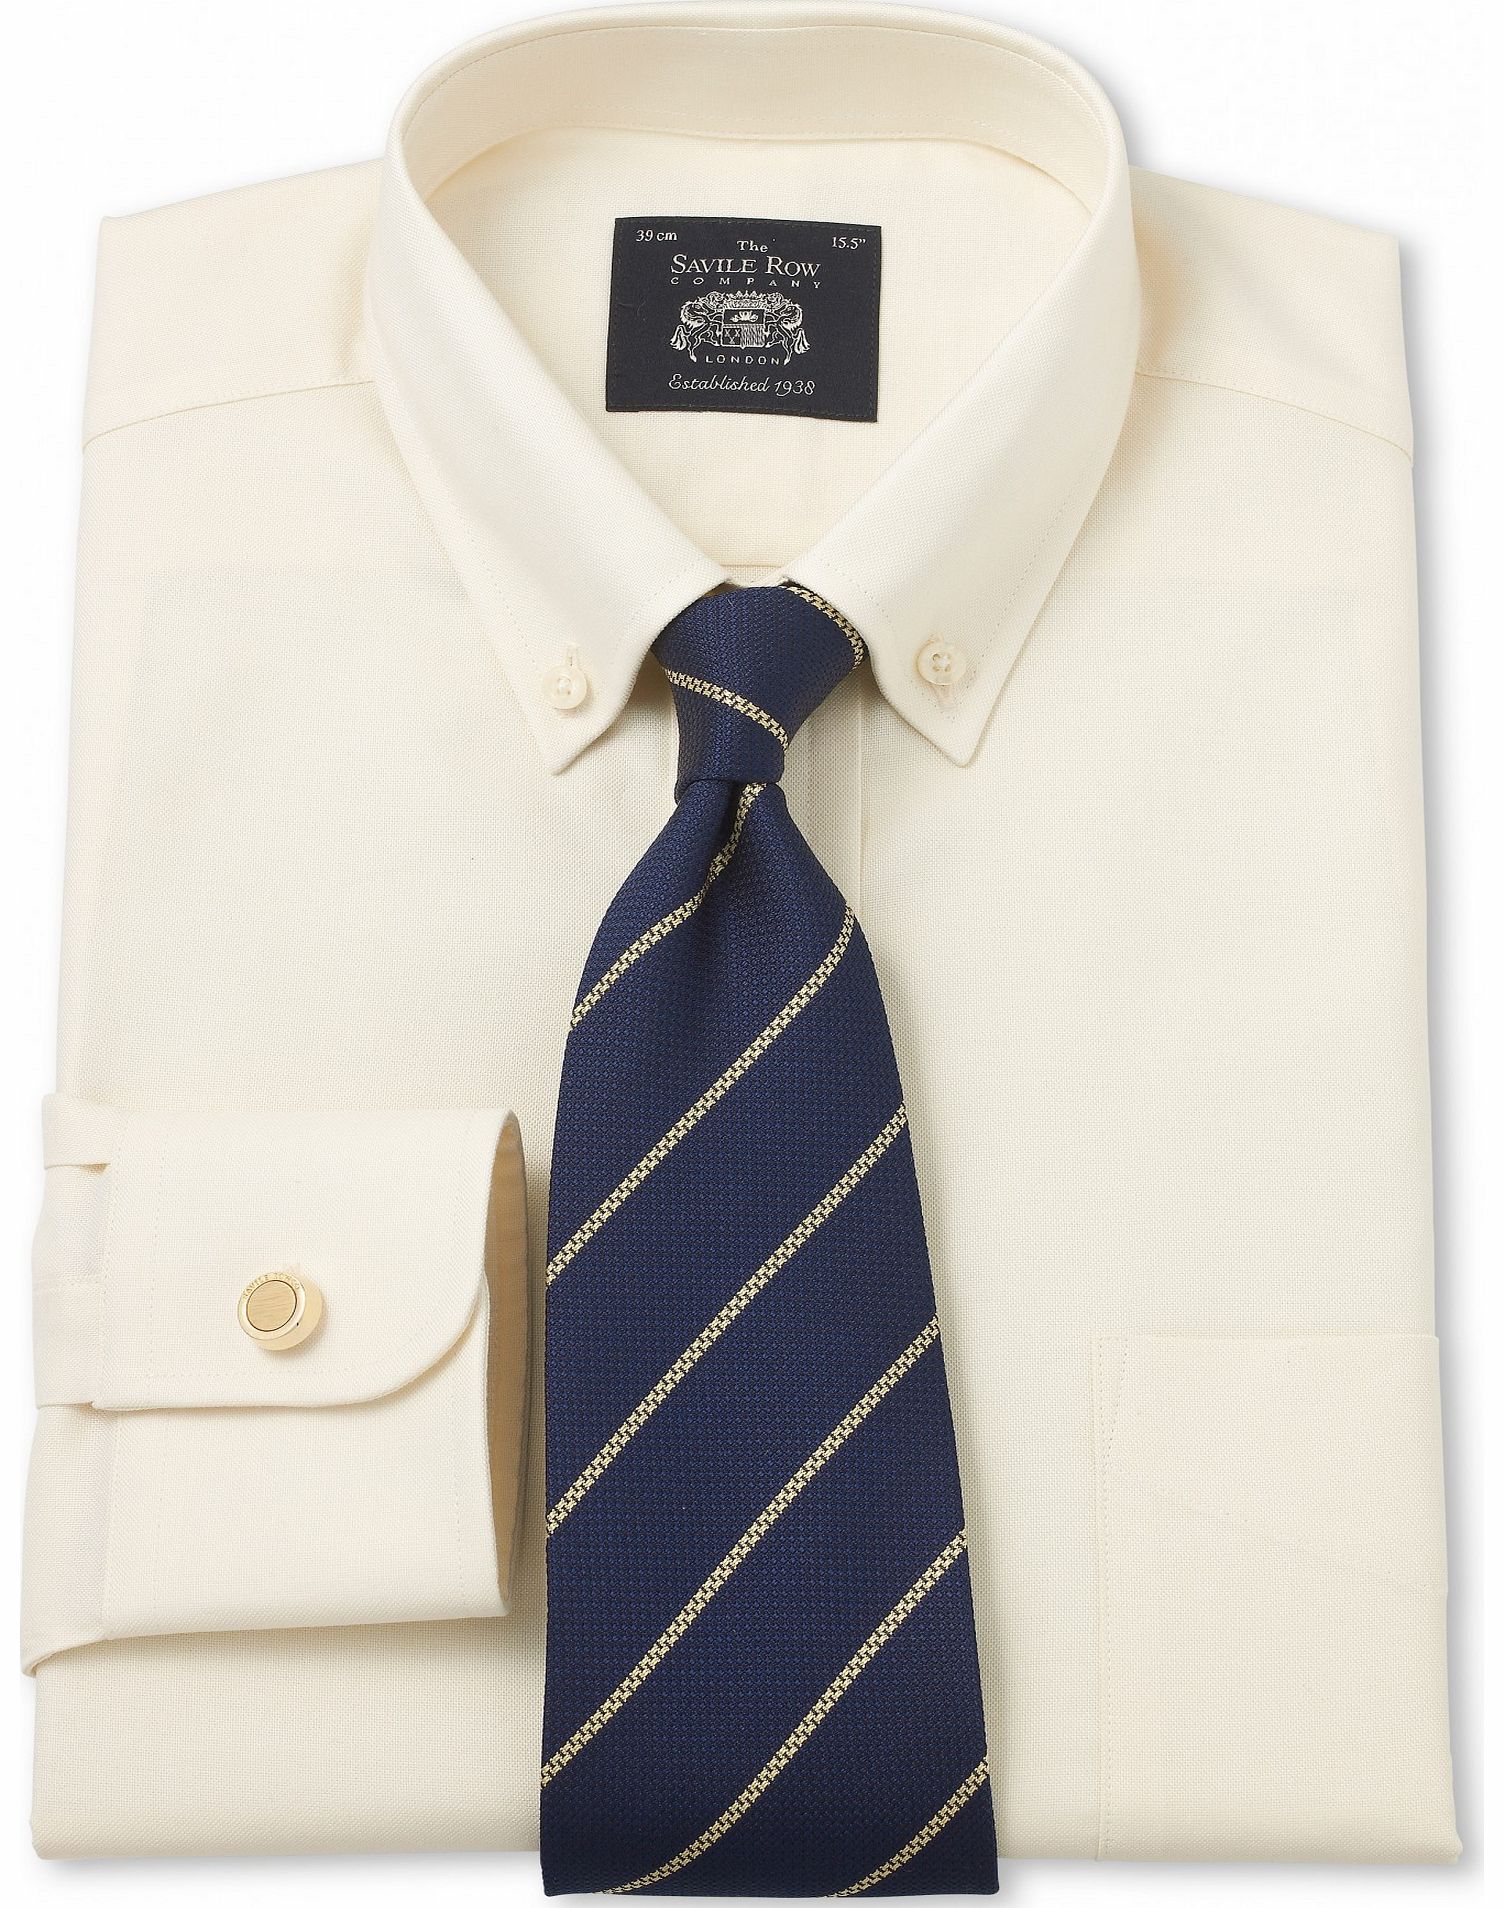 Savile Row Company Cream Pinpoint Classic Fit Shirt 17 1/2``